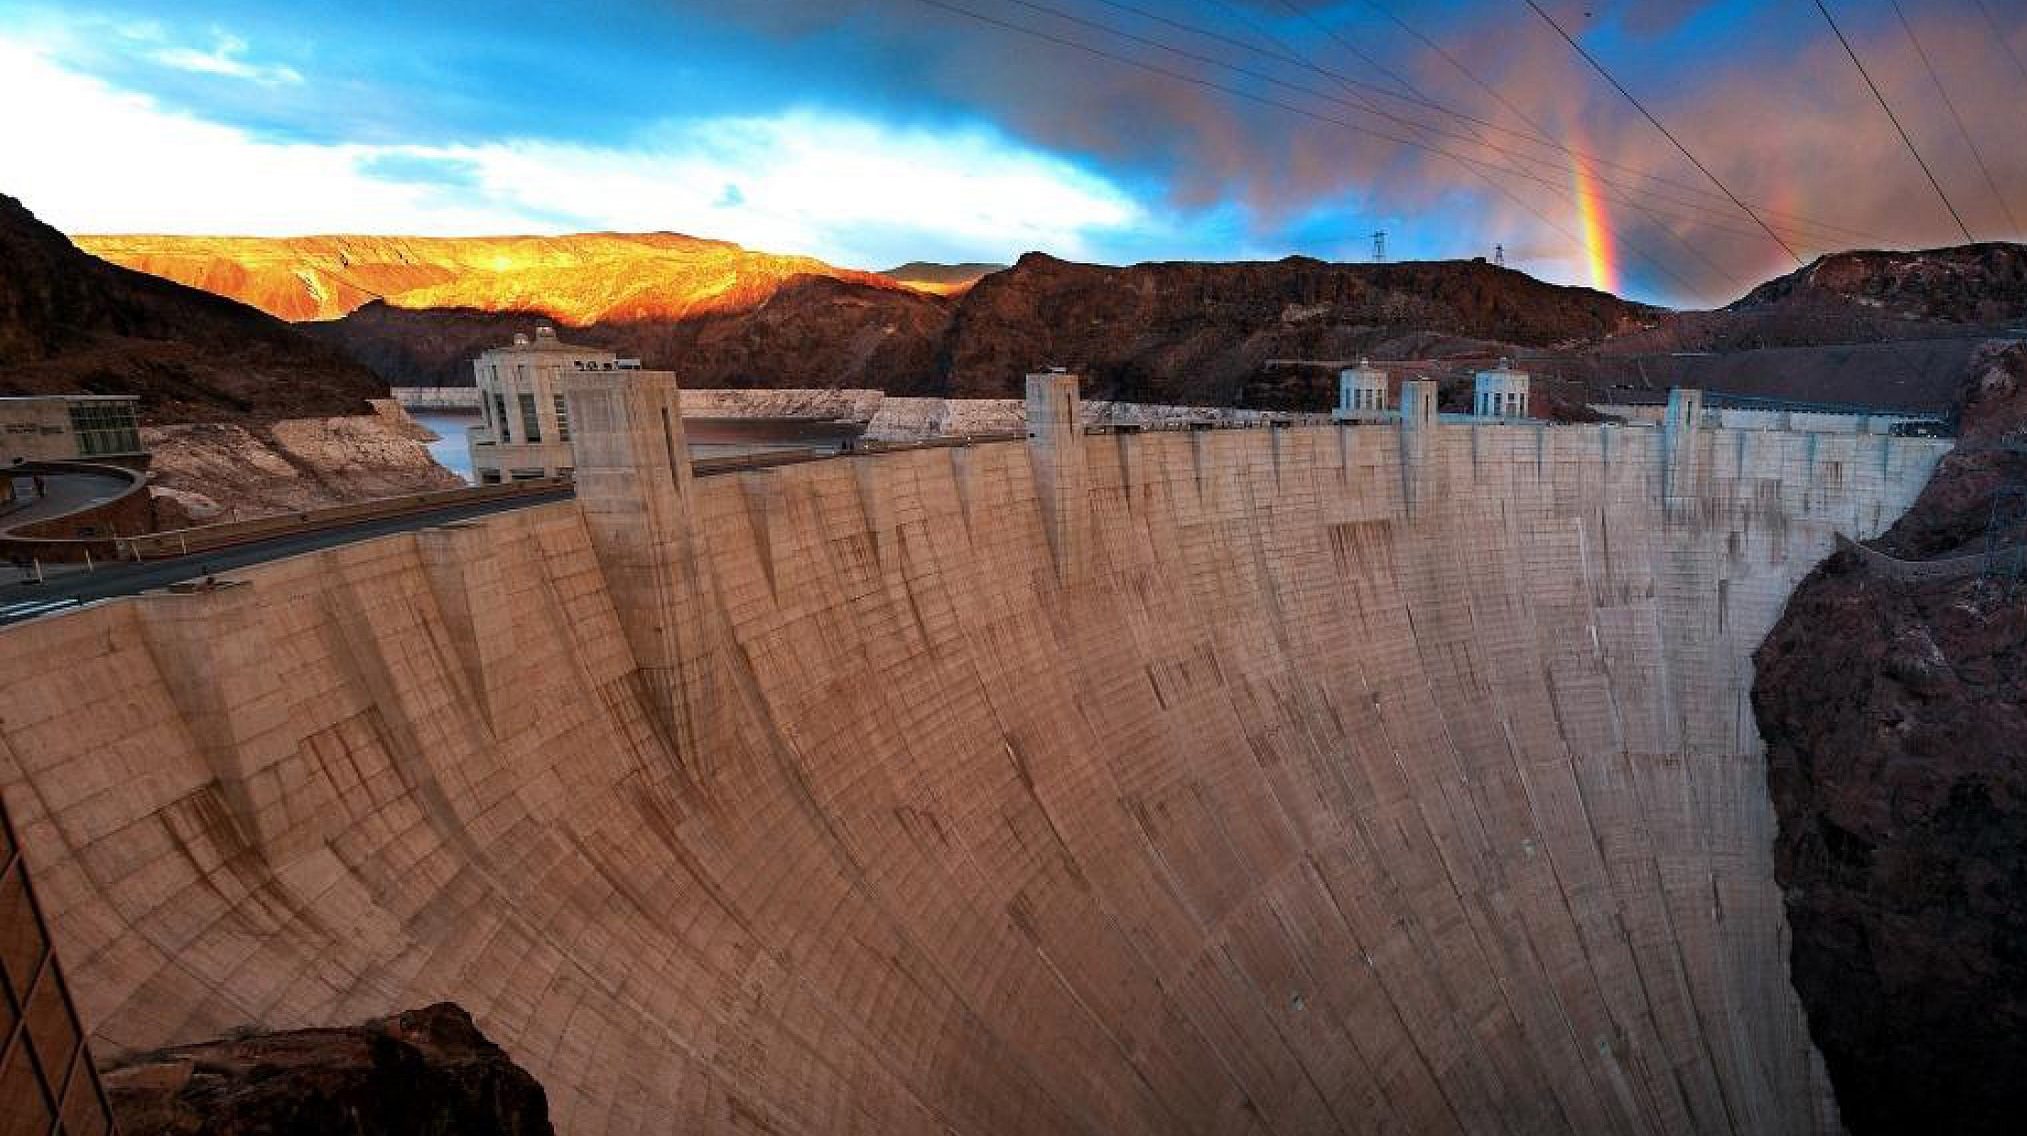 Photo of Hoover Dam at sunset.